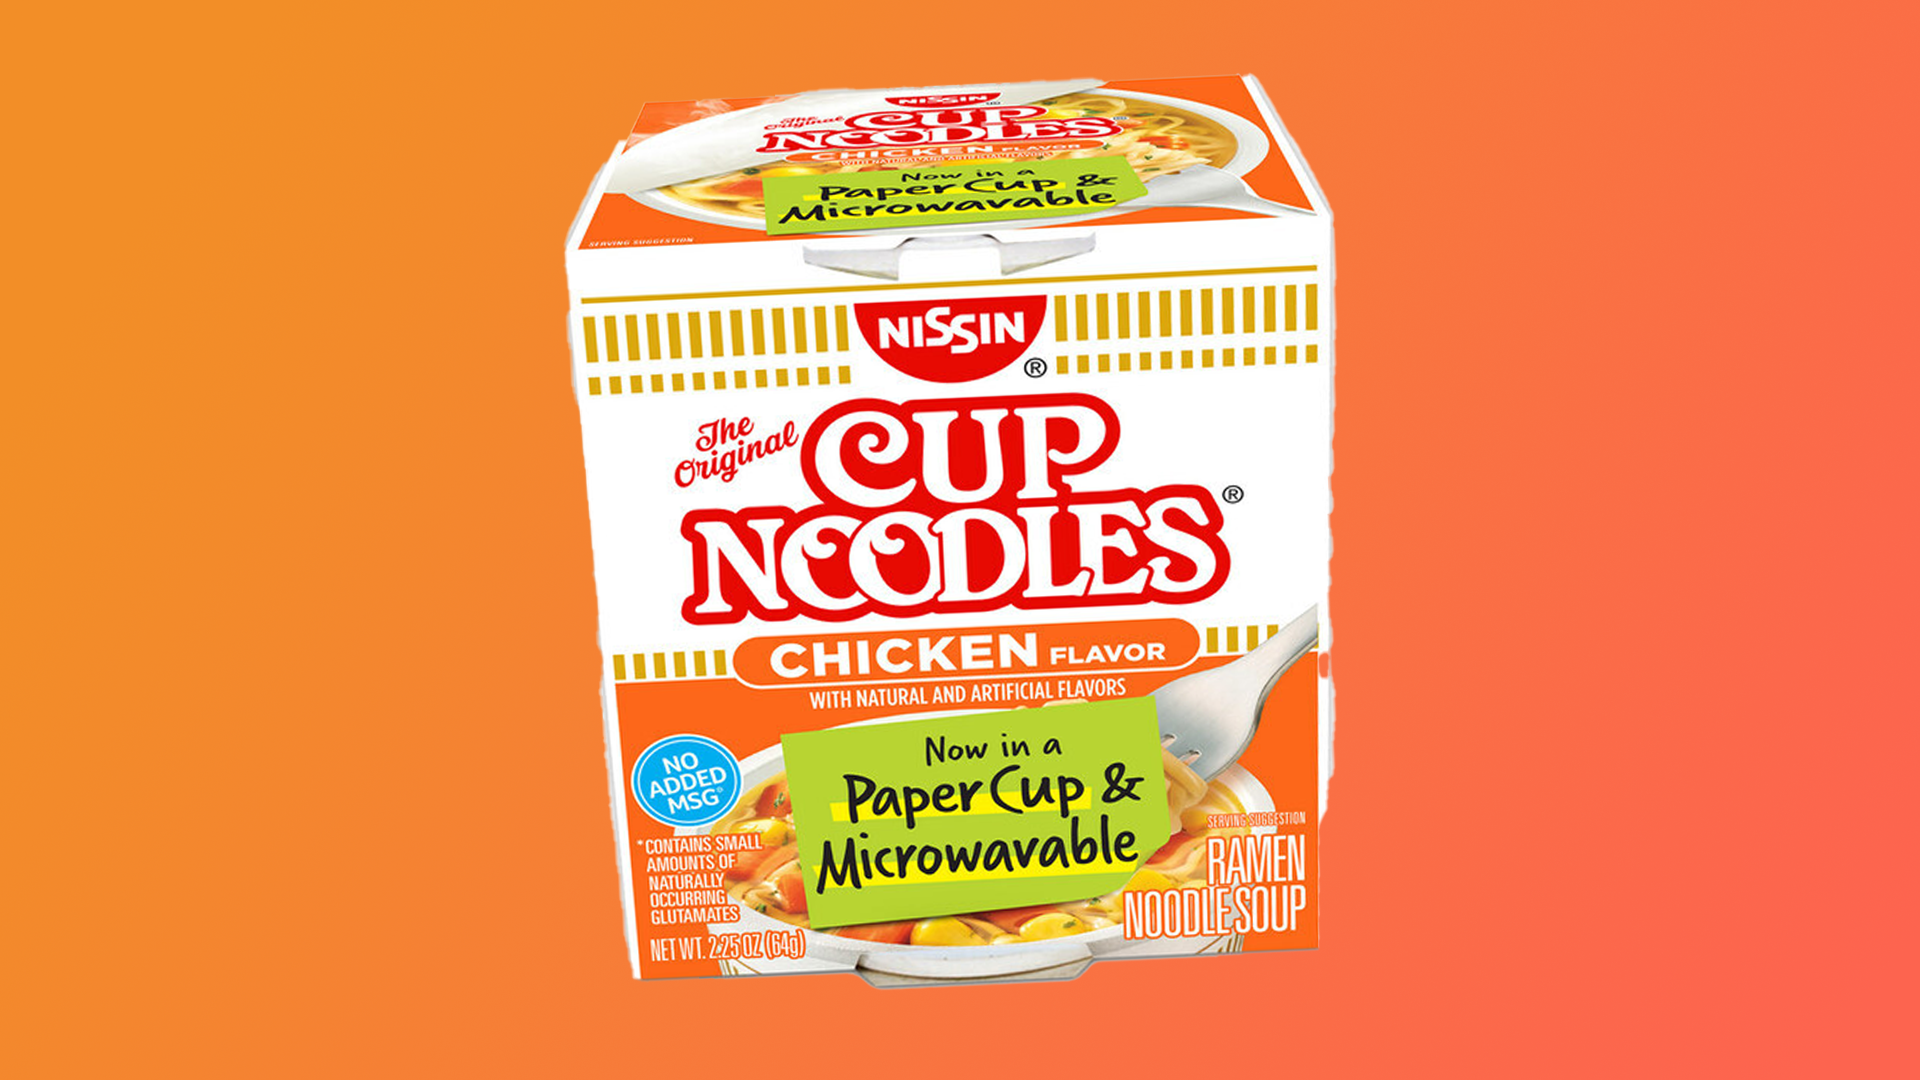 At Long Last, Nissin’s Cup Noodles Ditches Styrofoam For Its Ramen Packaging